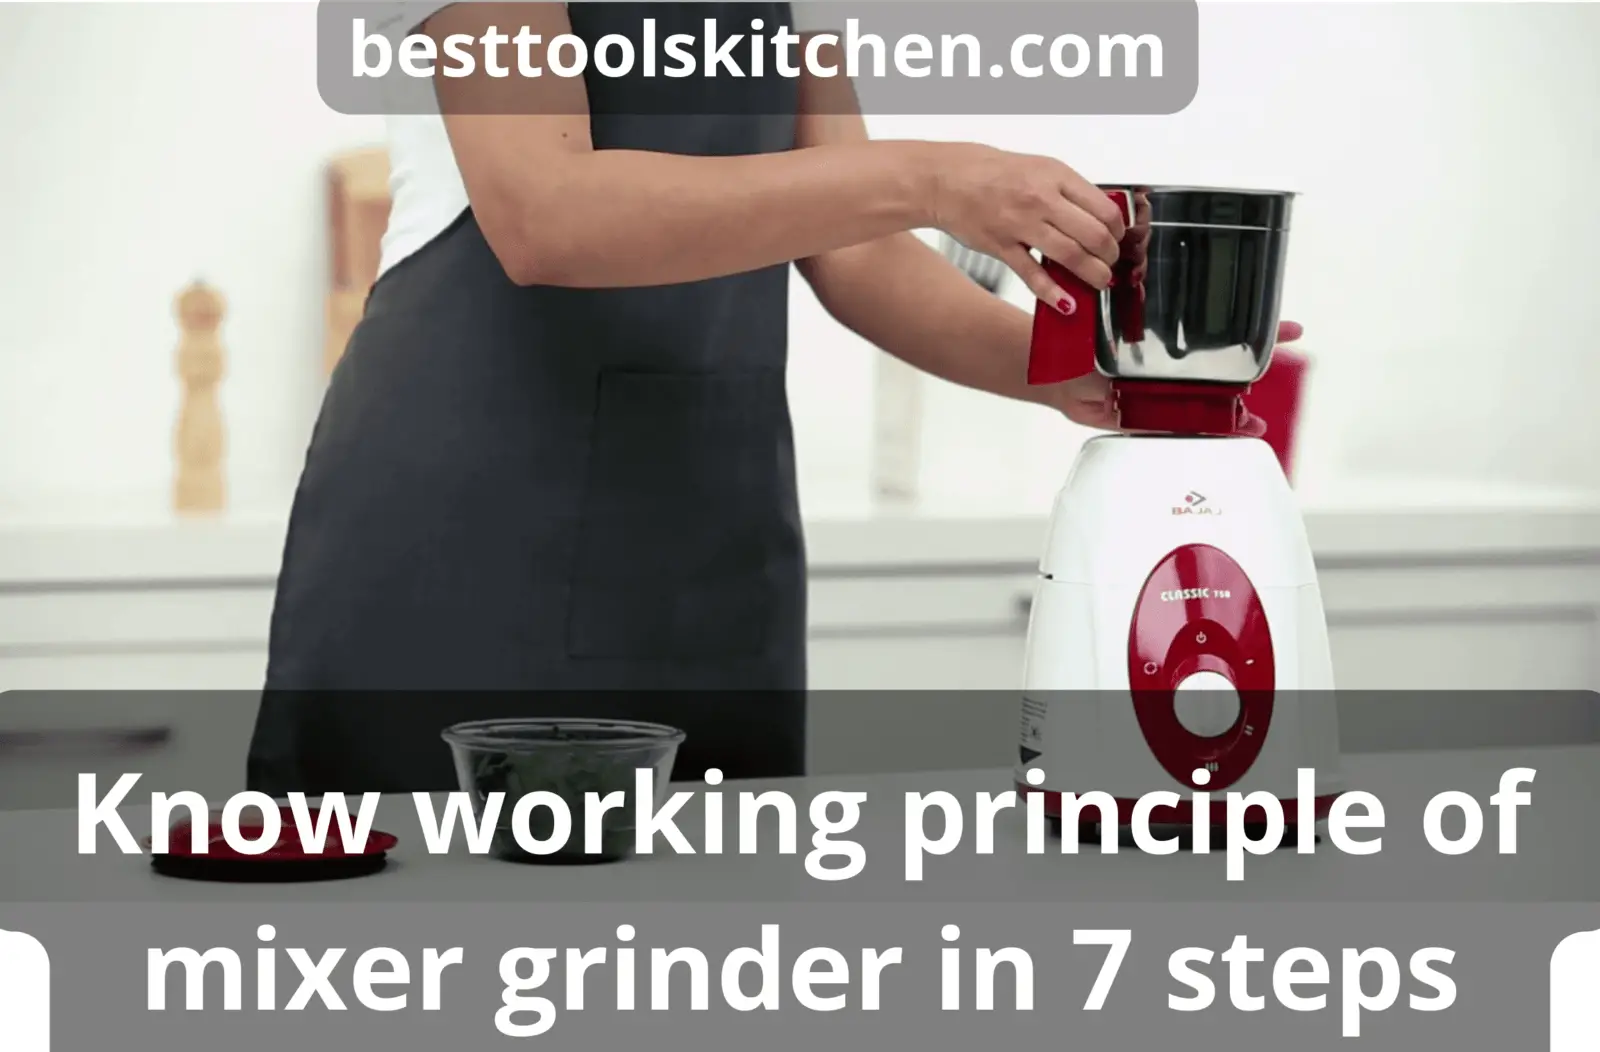 Know working principle of mixer grinder in 7 steps